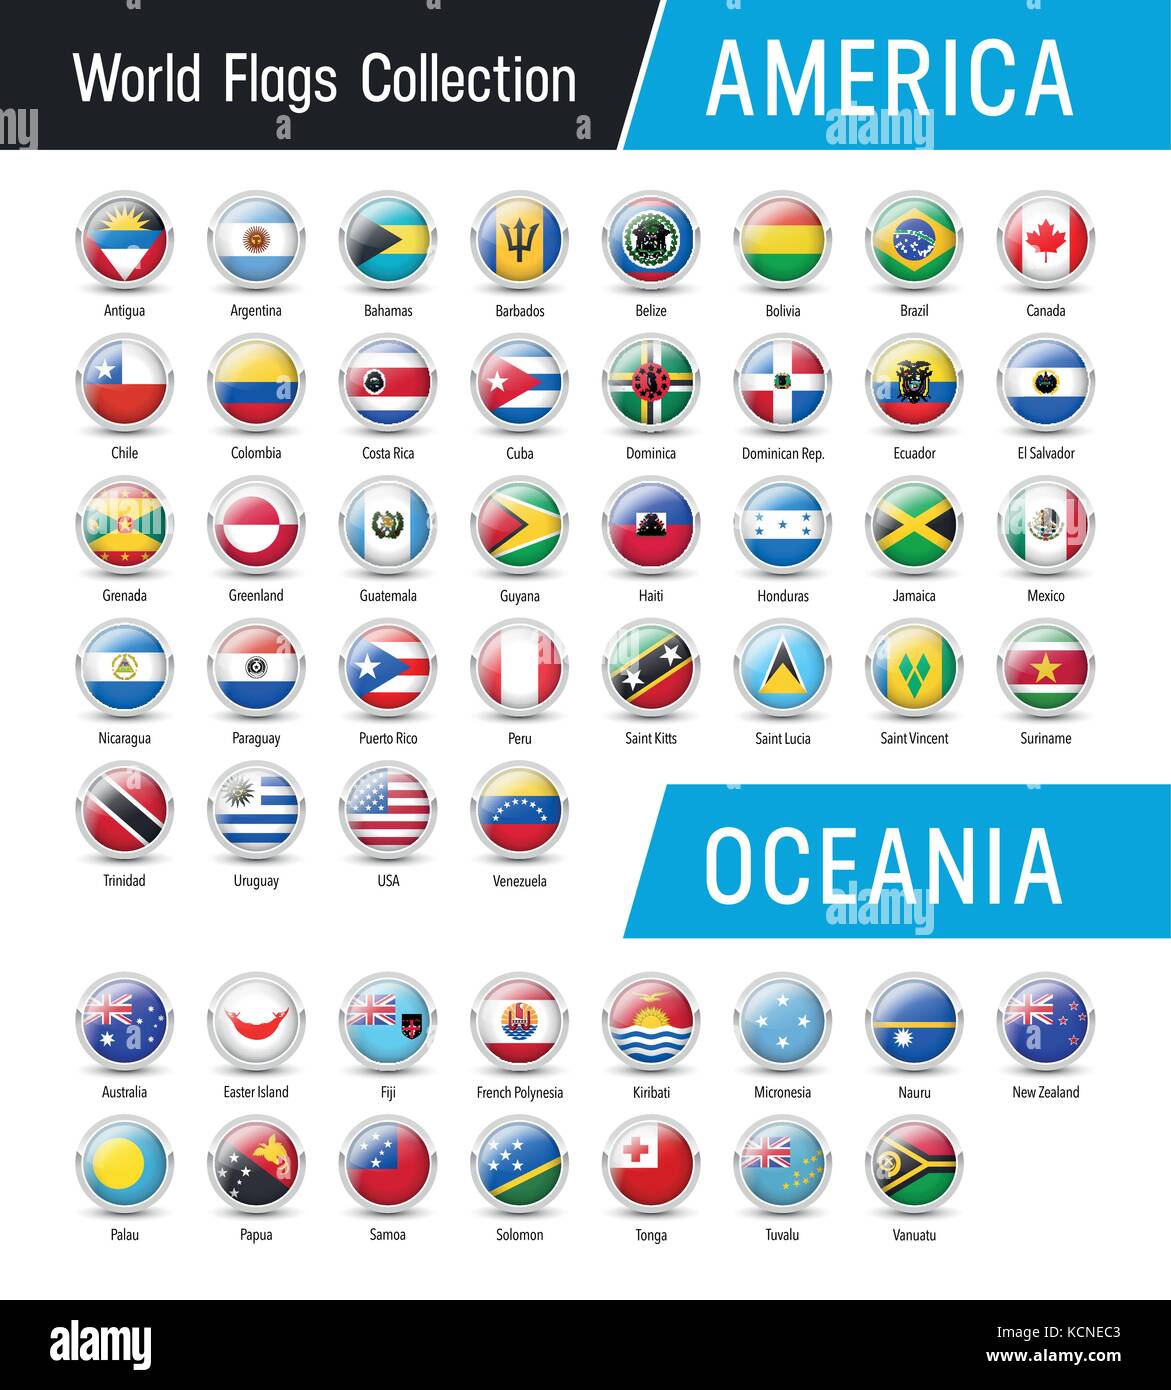 Flags of America and Oceania, inside round icons - Vector world flags collection Stock Vector